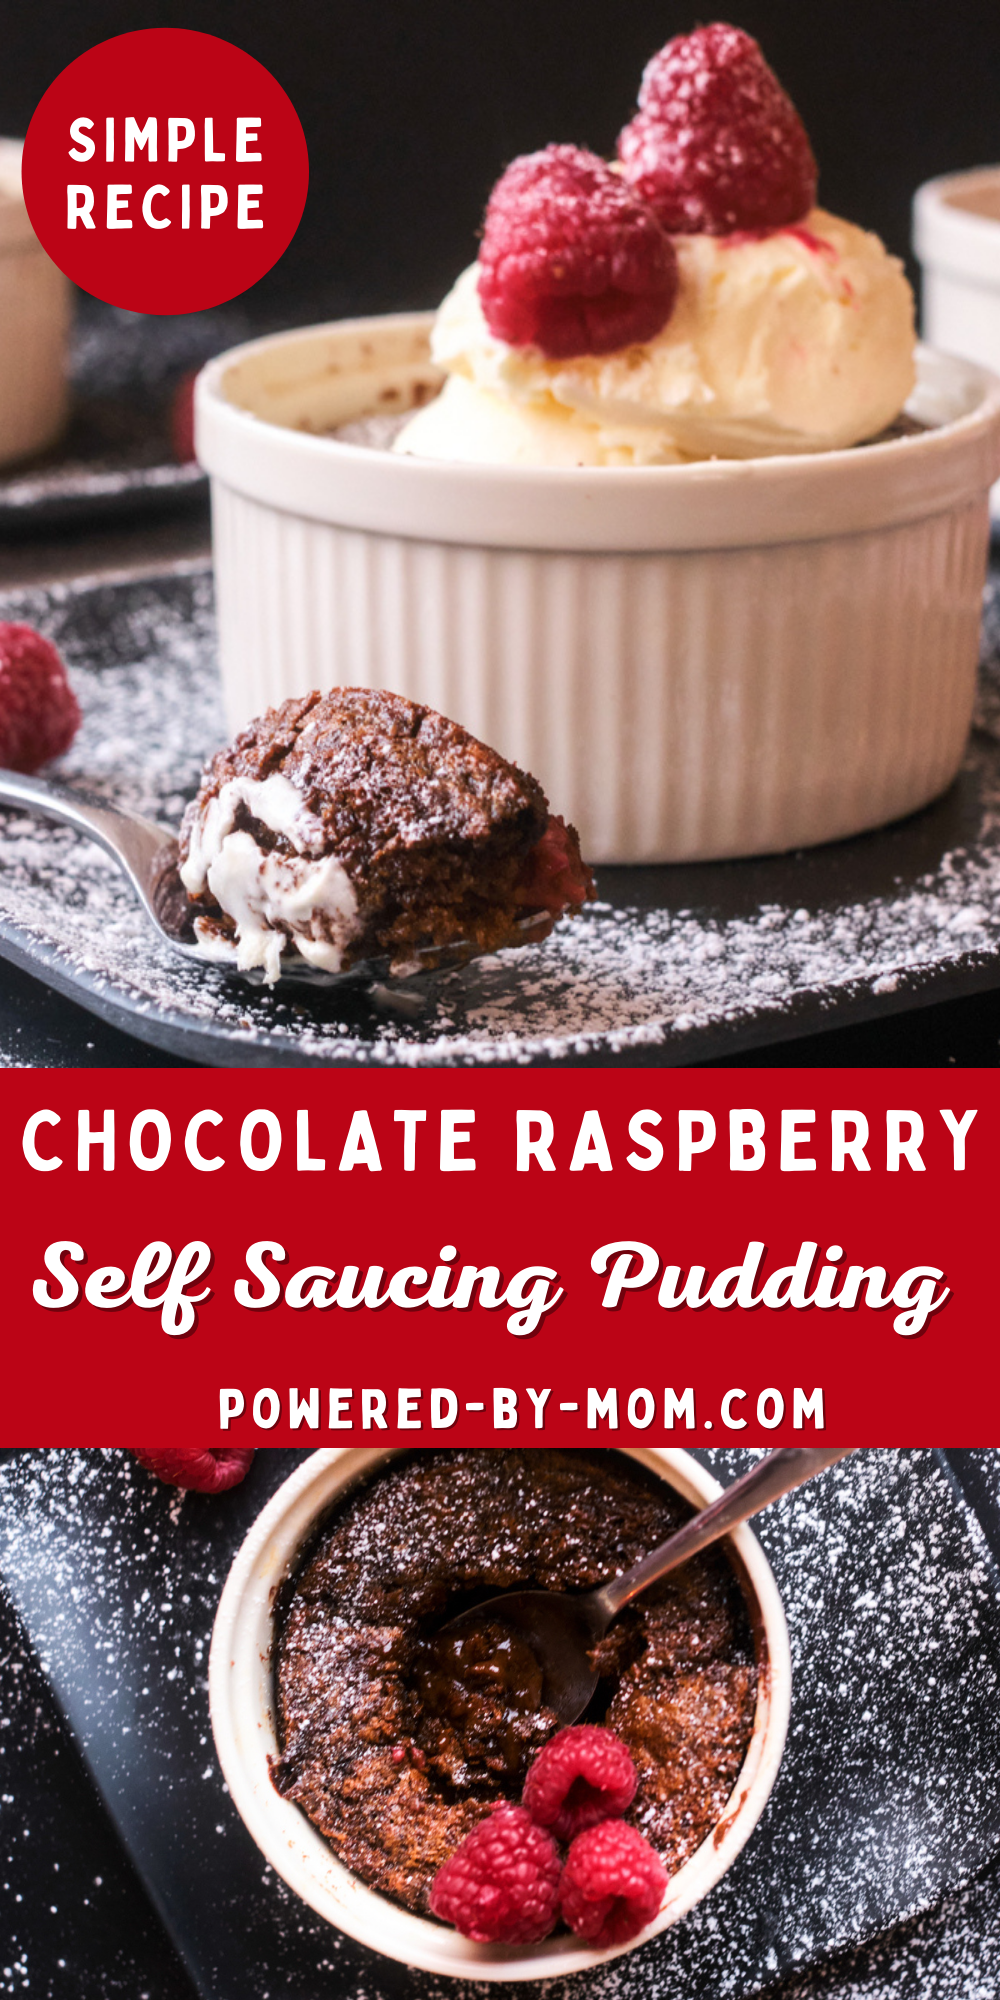 This Chocolate Self Saucing Pudding Cake is a classic dessert that magically creates a scrumptious, moist chocolate cake with a decadent chocolate sauce. It's simple and fairly quick to make that you could have any day of the week and it's always a crowd pleaser.  